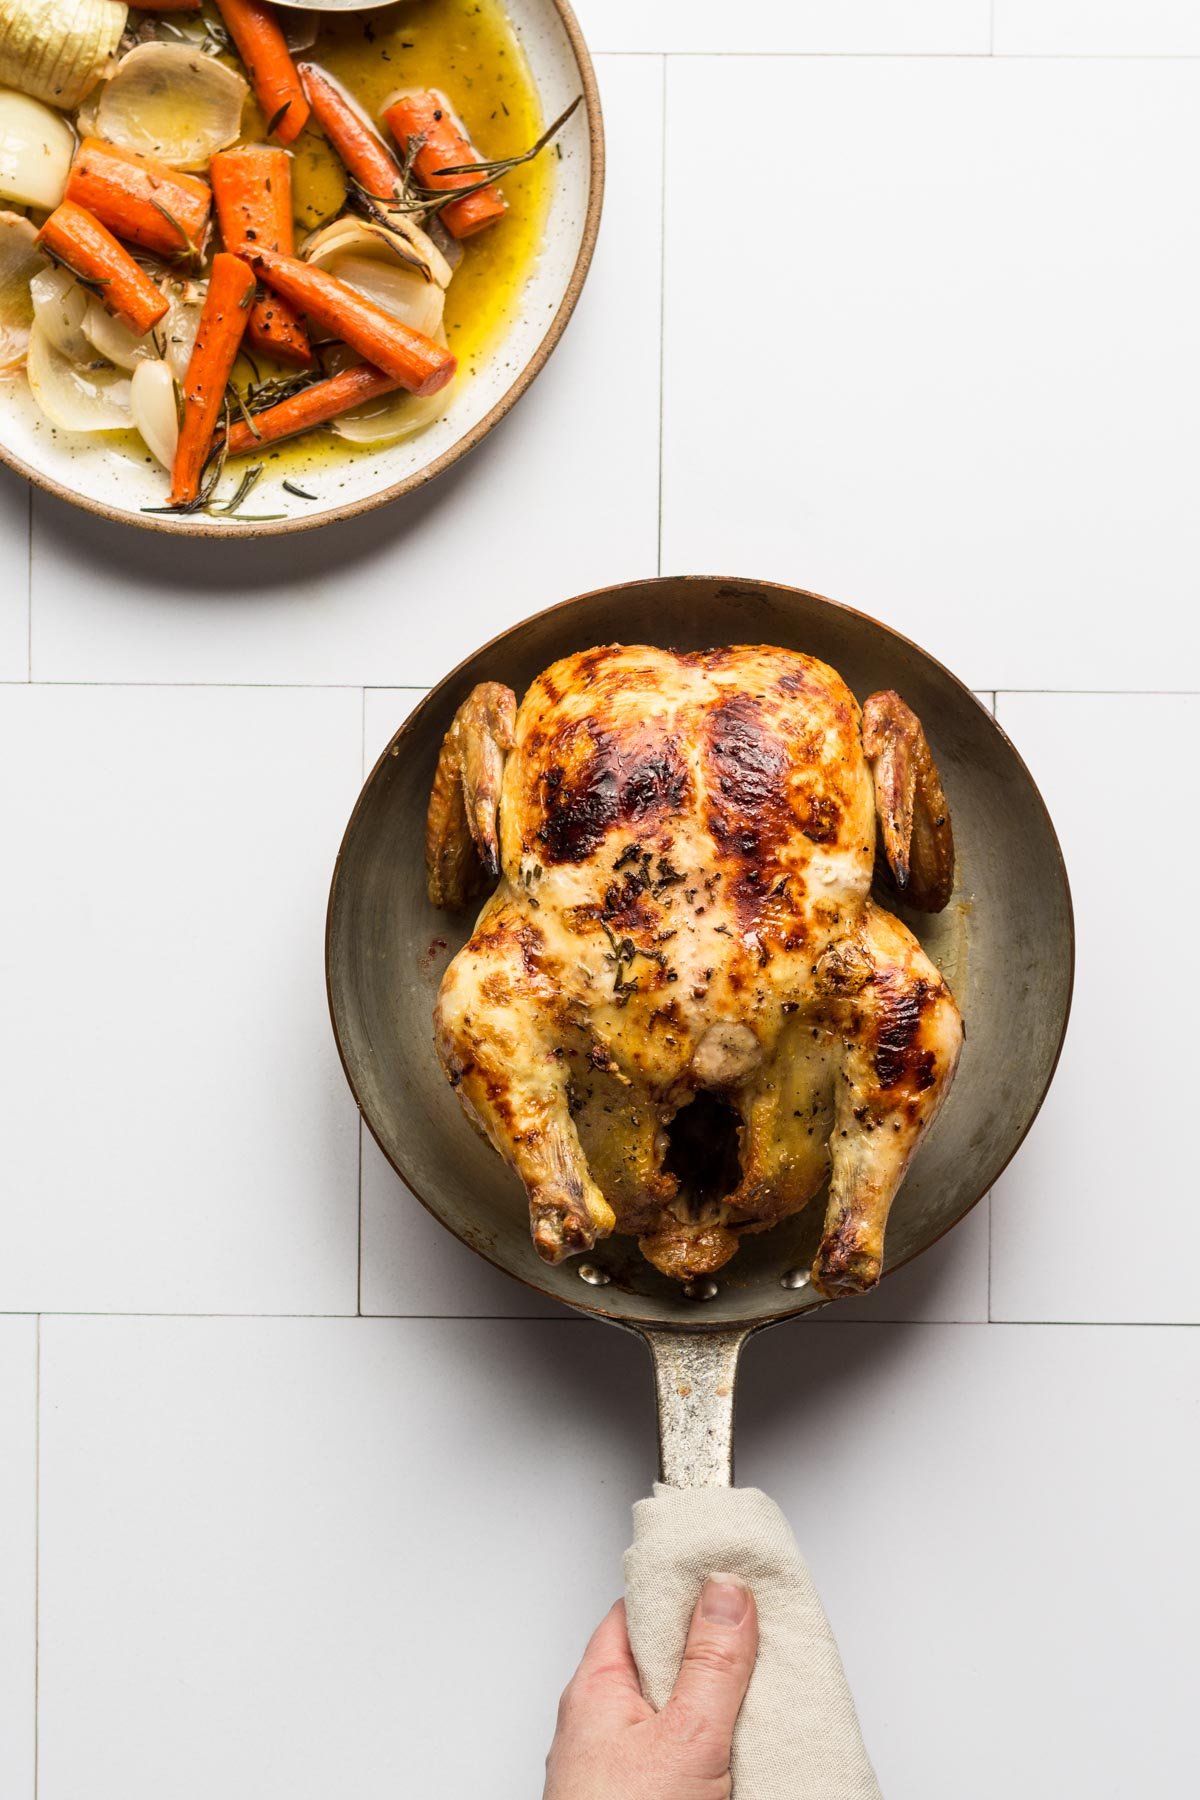 The Best Whole Roasted Chicken - All the Healthy Things